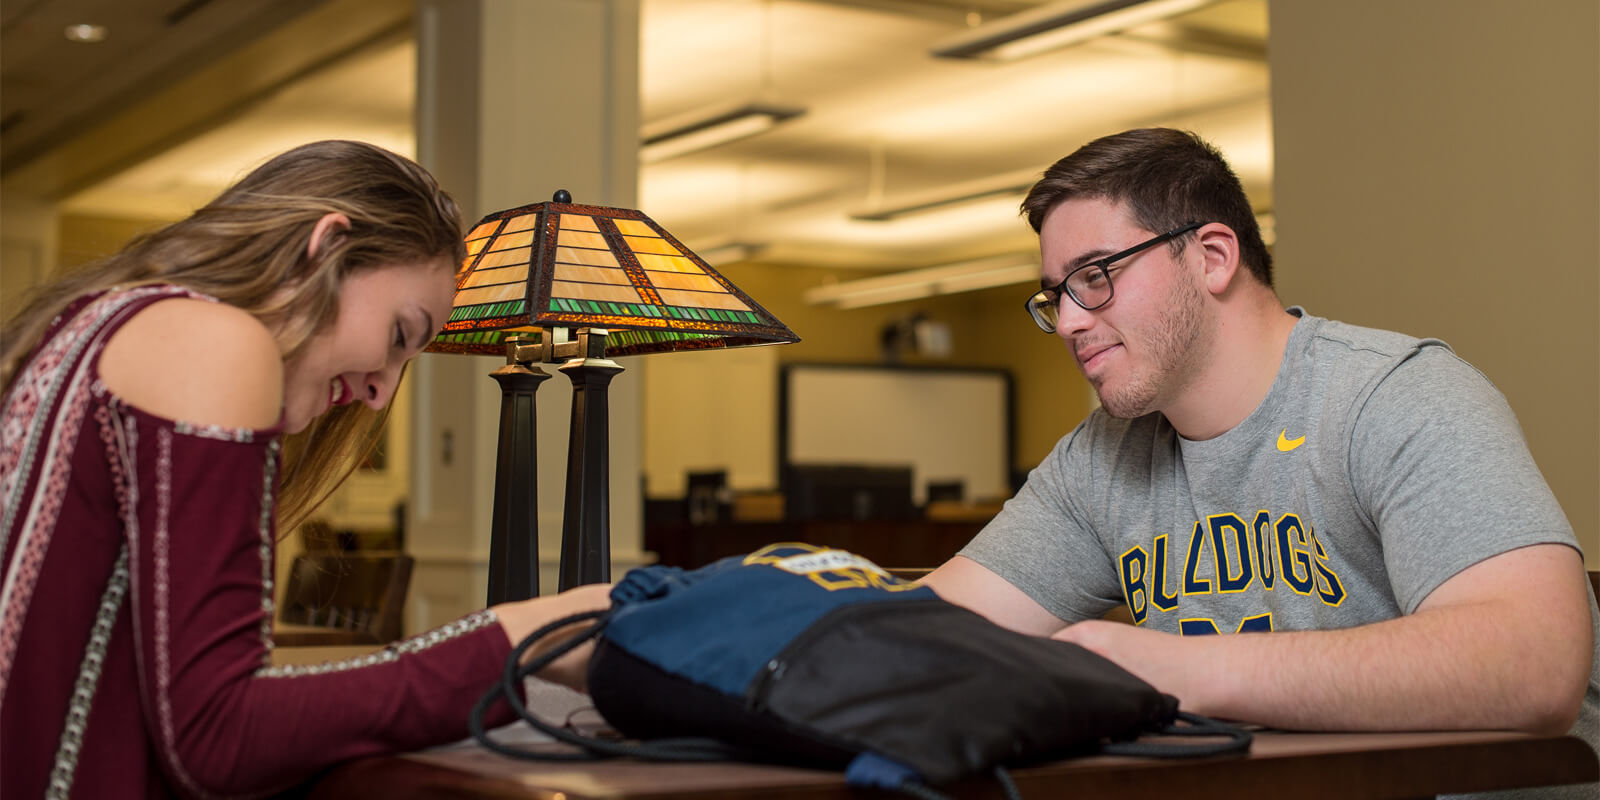 Students study together in the library.